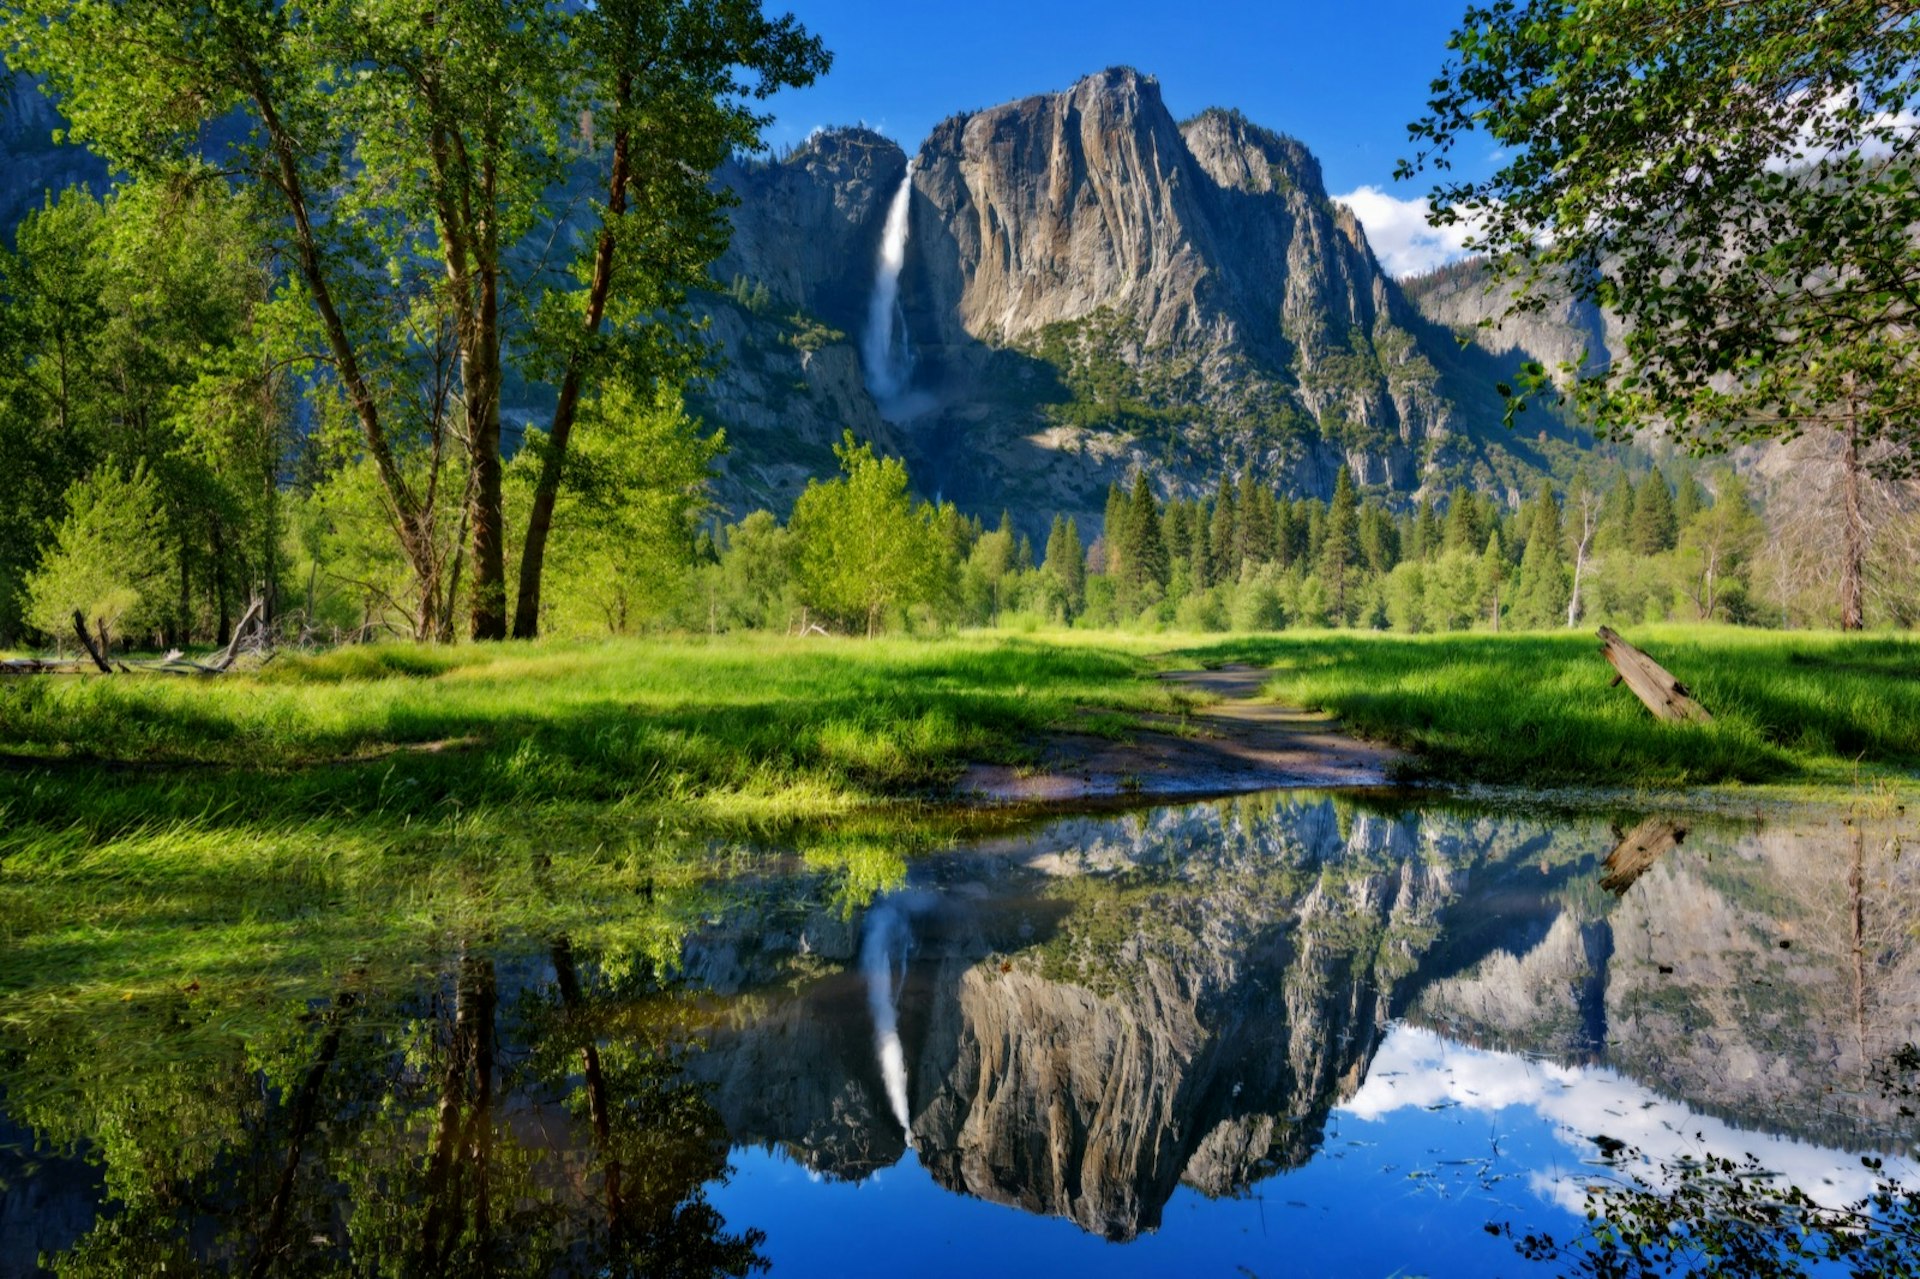 Yosemite Falls reflected perfectly in outlet of Merced River by Swinging Bridge, Yosemite National Park, California